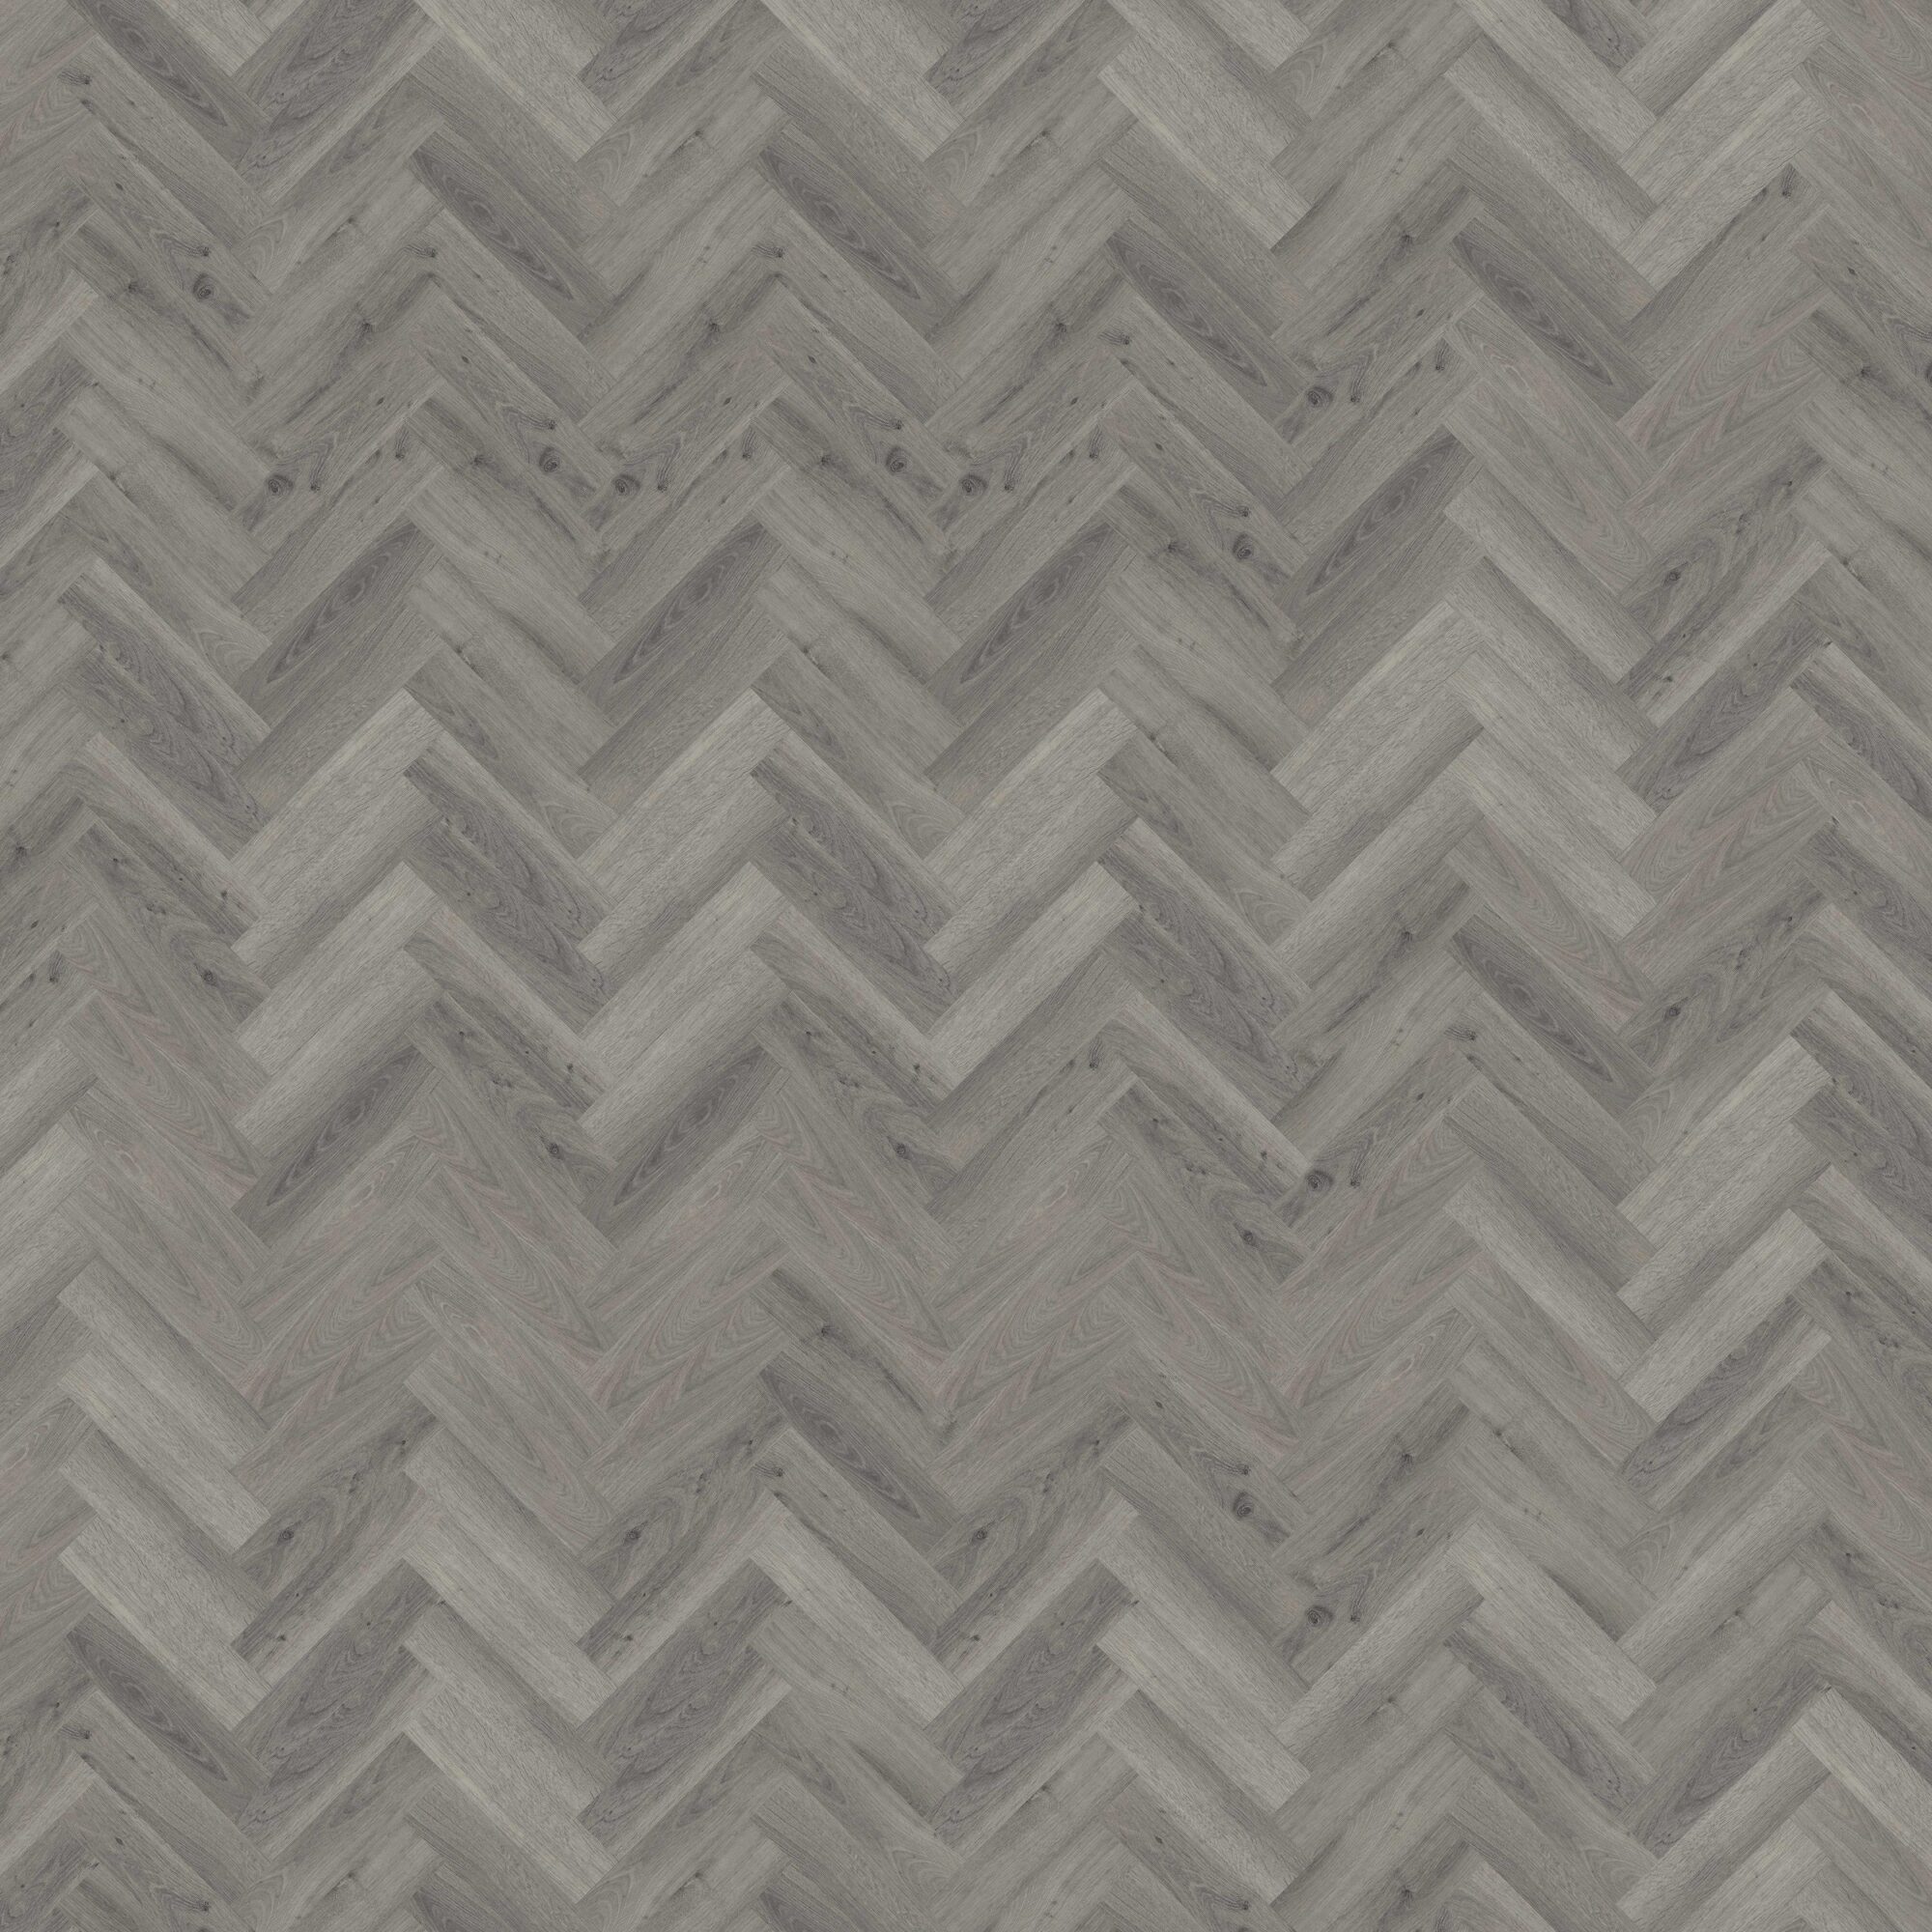 Highland Oak Parquet – Frosted